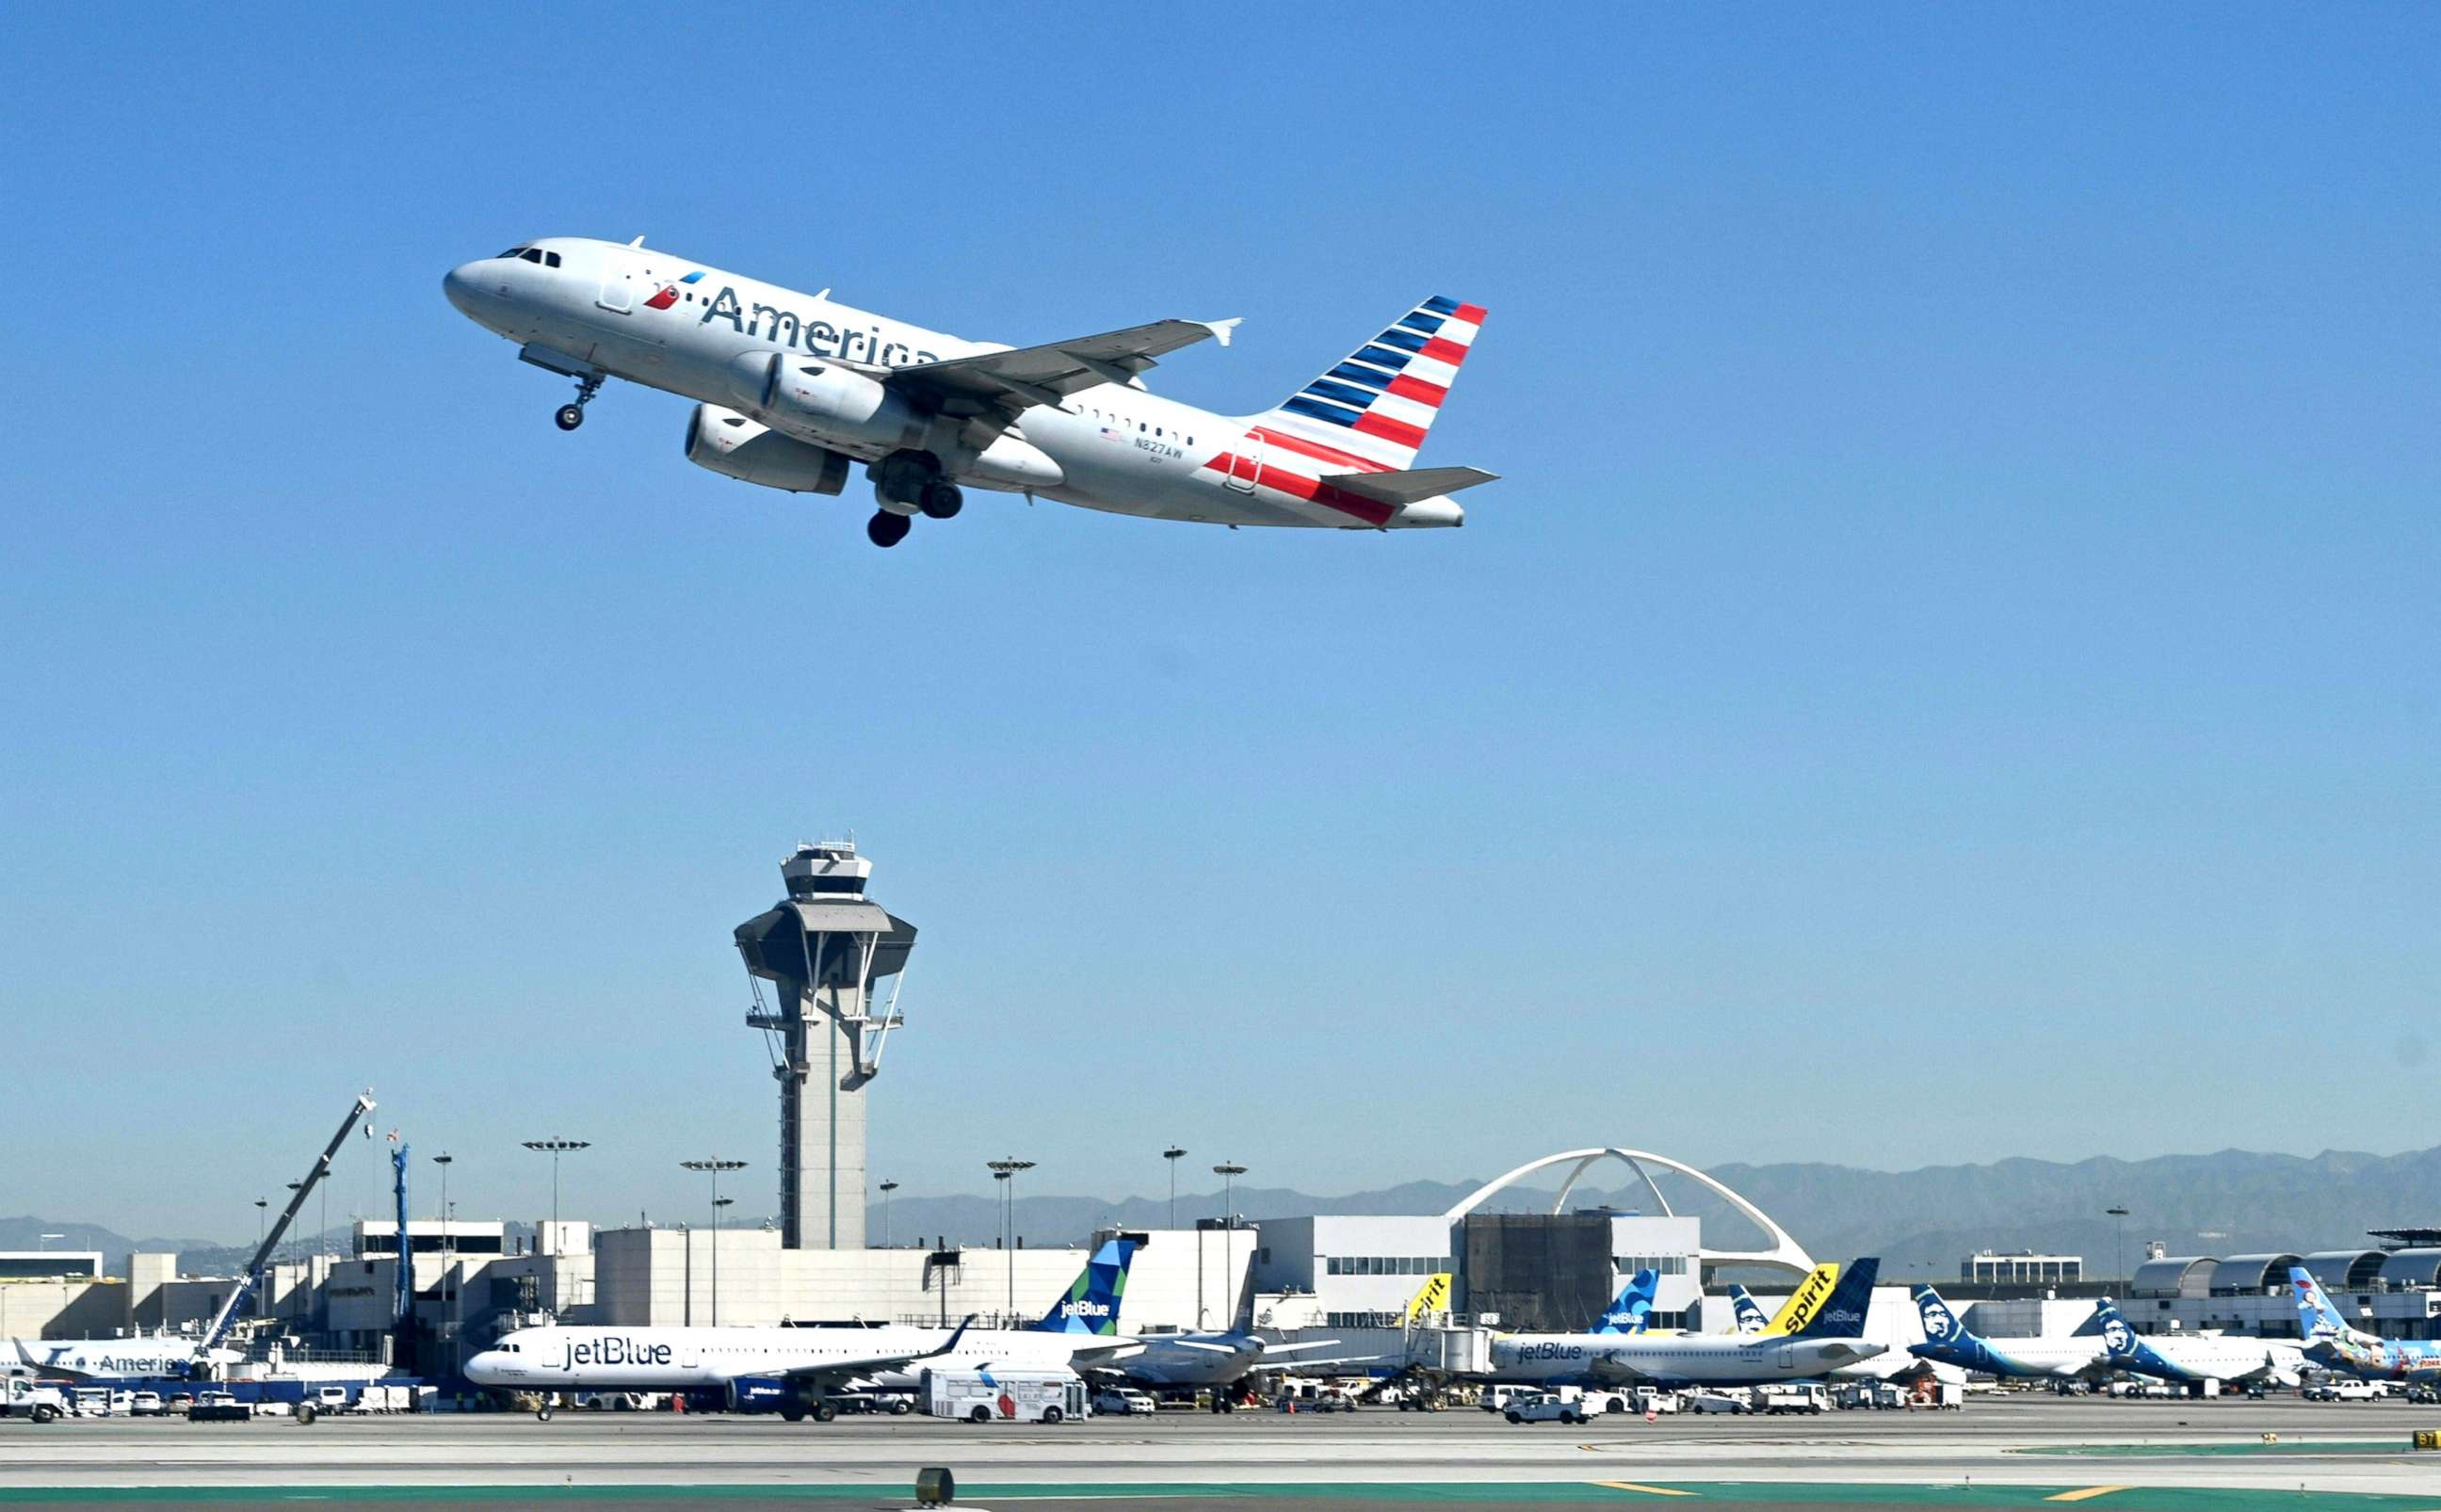 PHOTO: An American Airlines Airbus 319 plane takes off from the Los Angeles International Airport (LAX) on March 23, 2022.